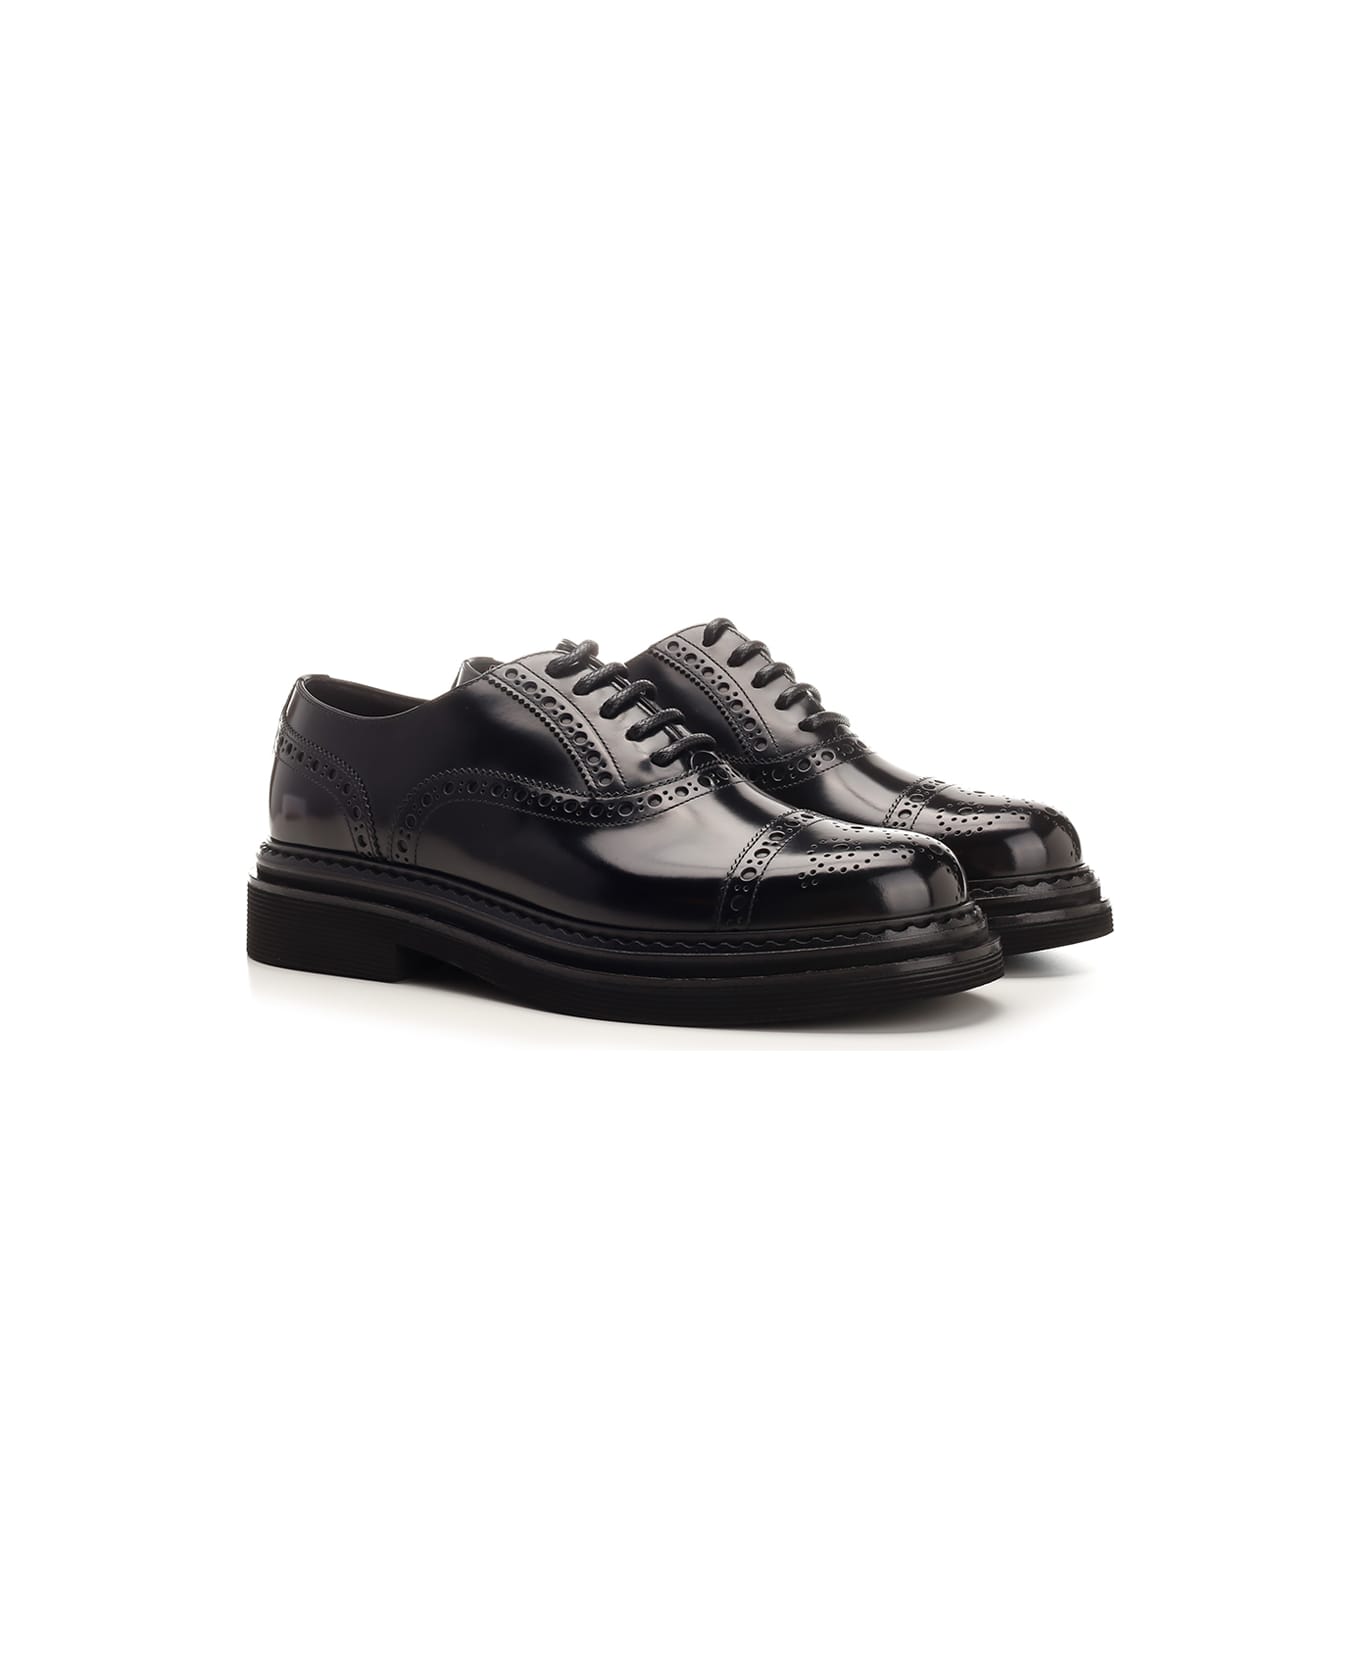 Dolce & Gabbana Leather Oxford Shoes - Nero